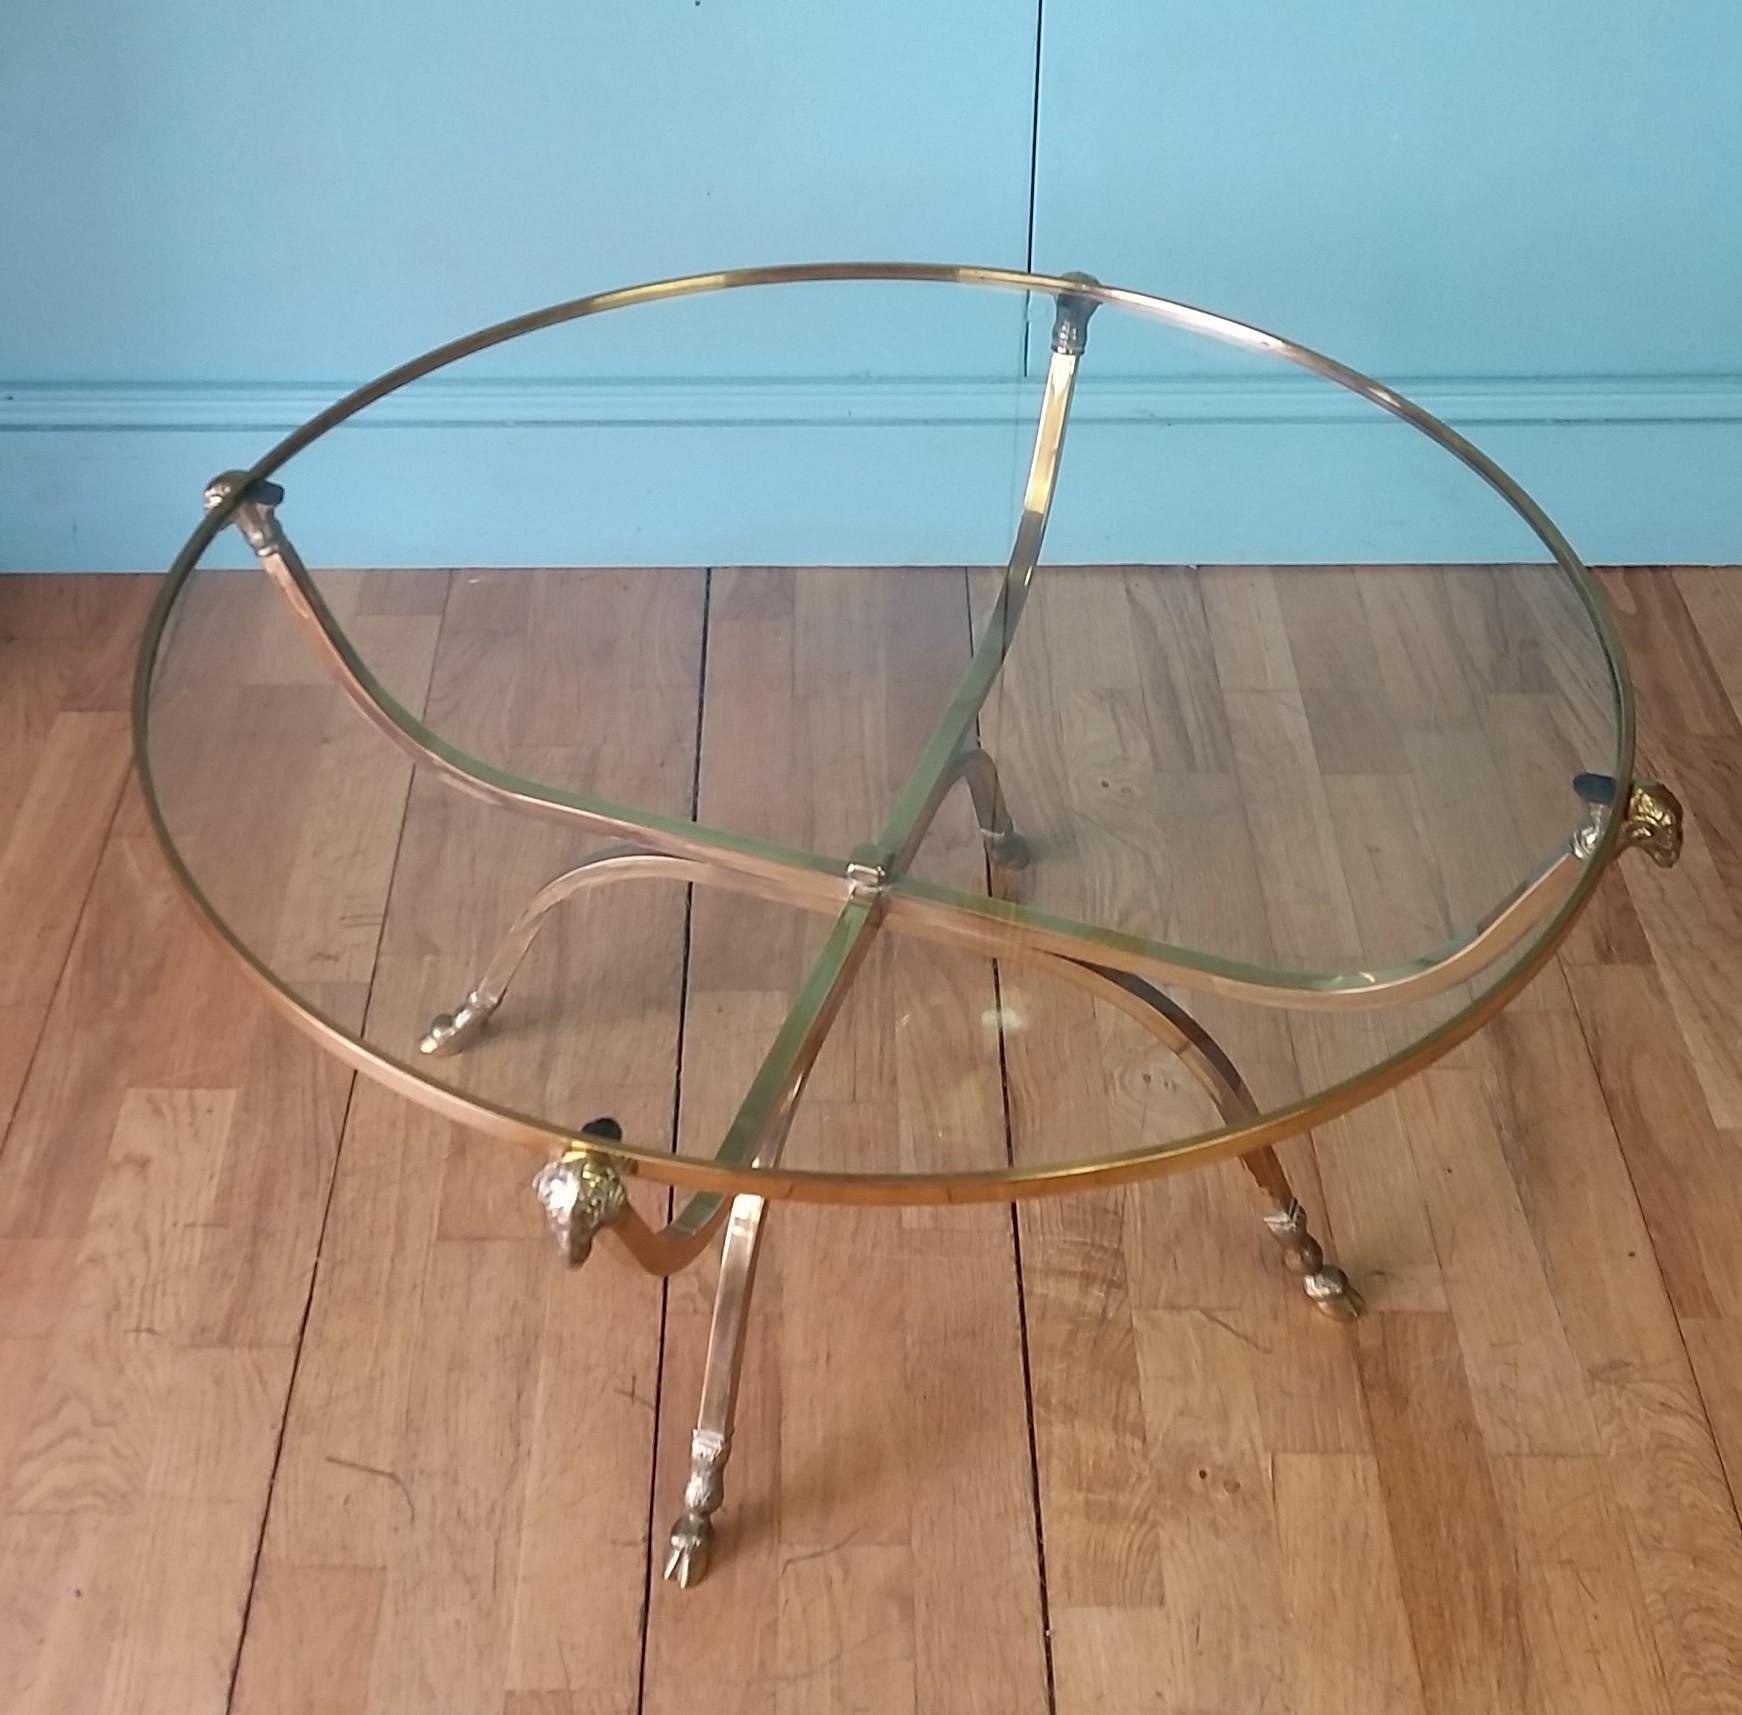 Original French coffee table circa 1960's designed by the Paris based interior design house of Maison Jansen.
Solid brass frame with decorative rams head finials and hoof feet to all four legs supporting circular glass top.
In lovely aged original